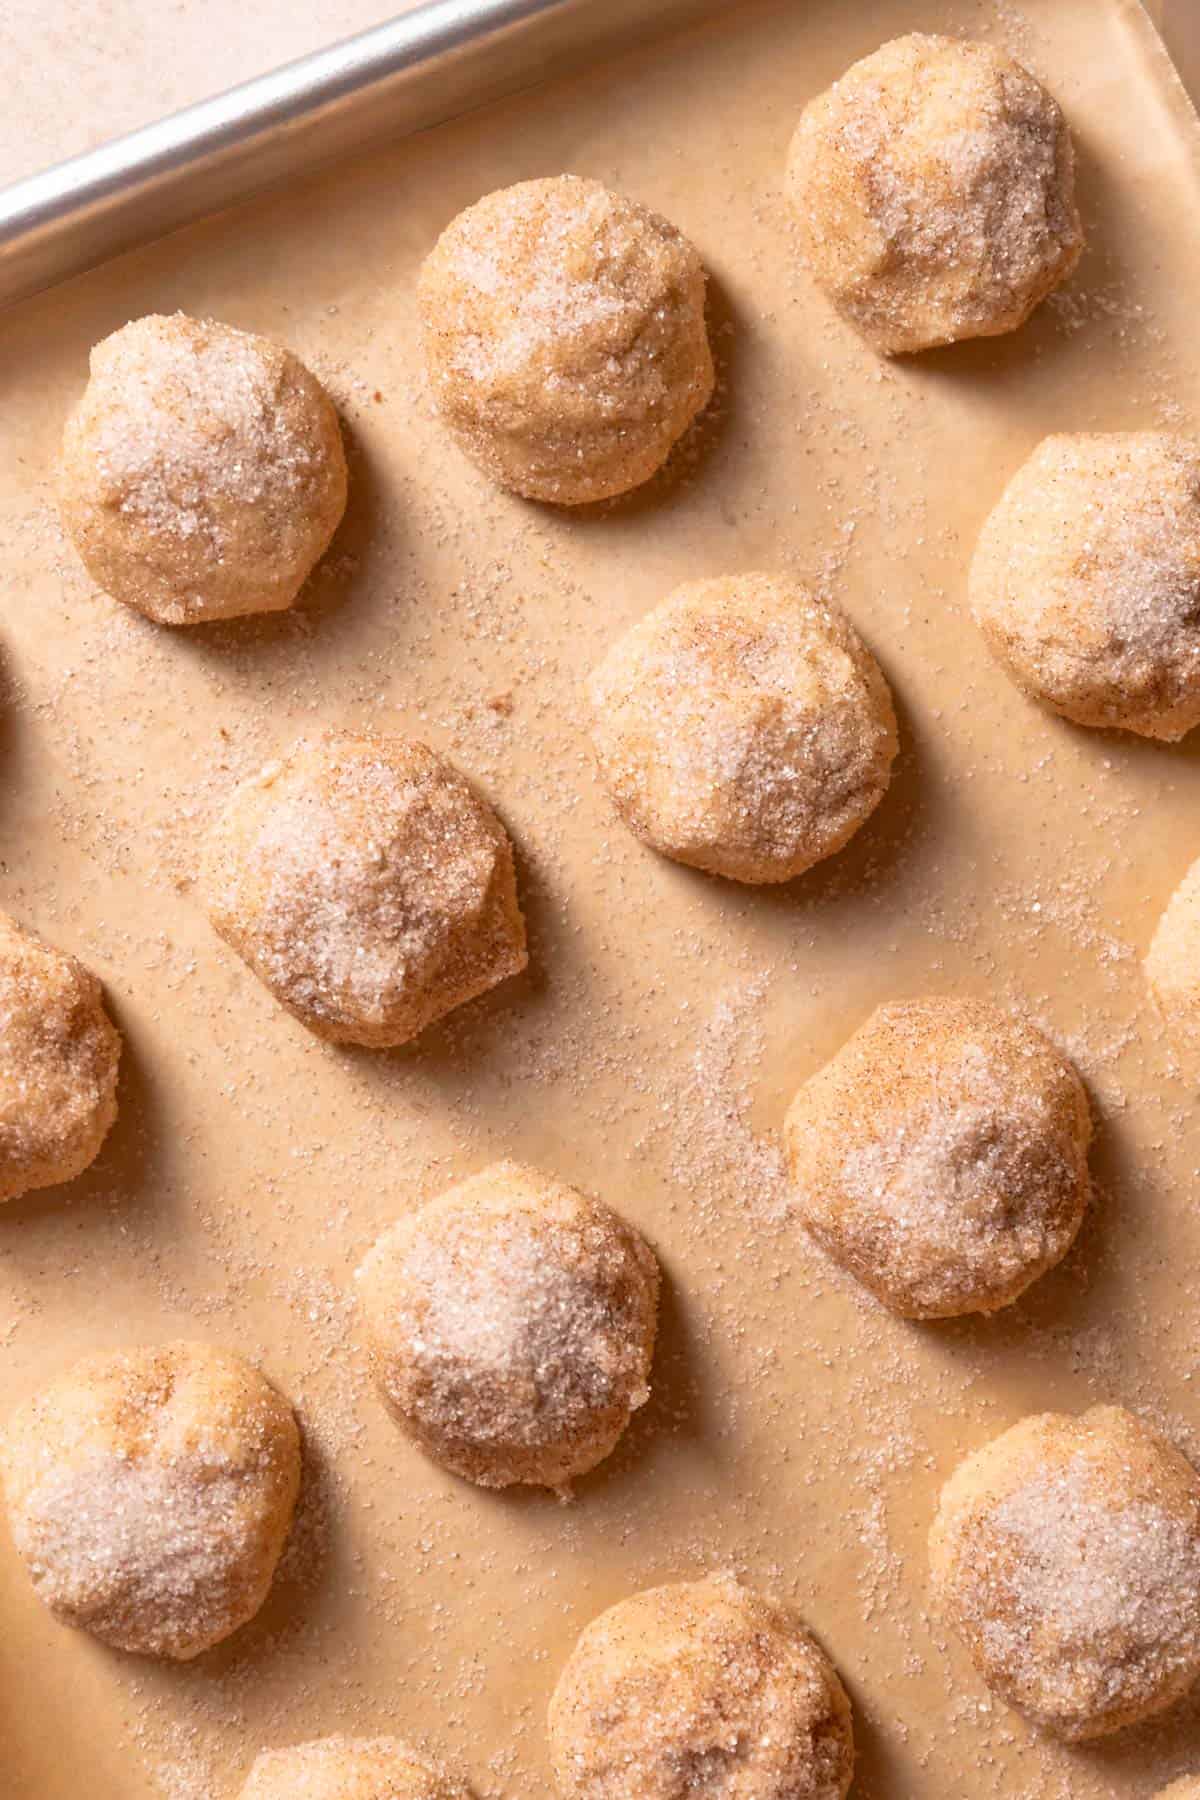 balls of cookie dough rolled in cinnamon sugar on a baking tray.